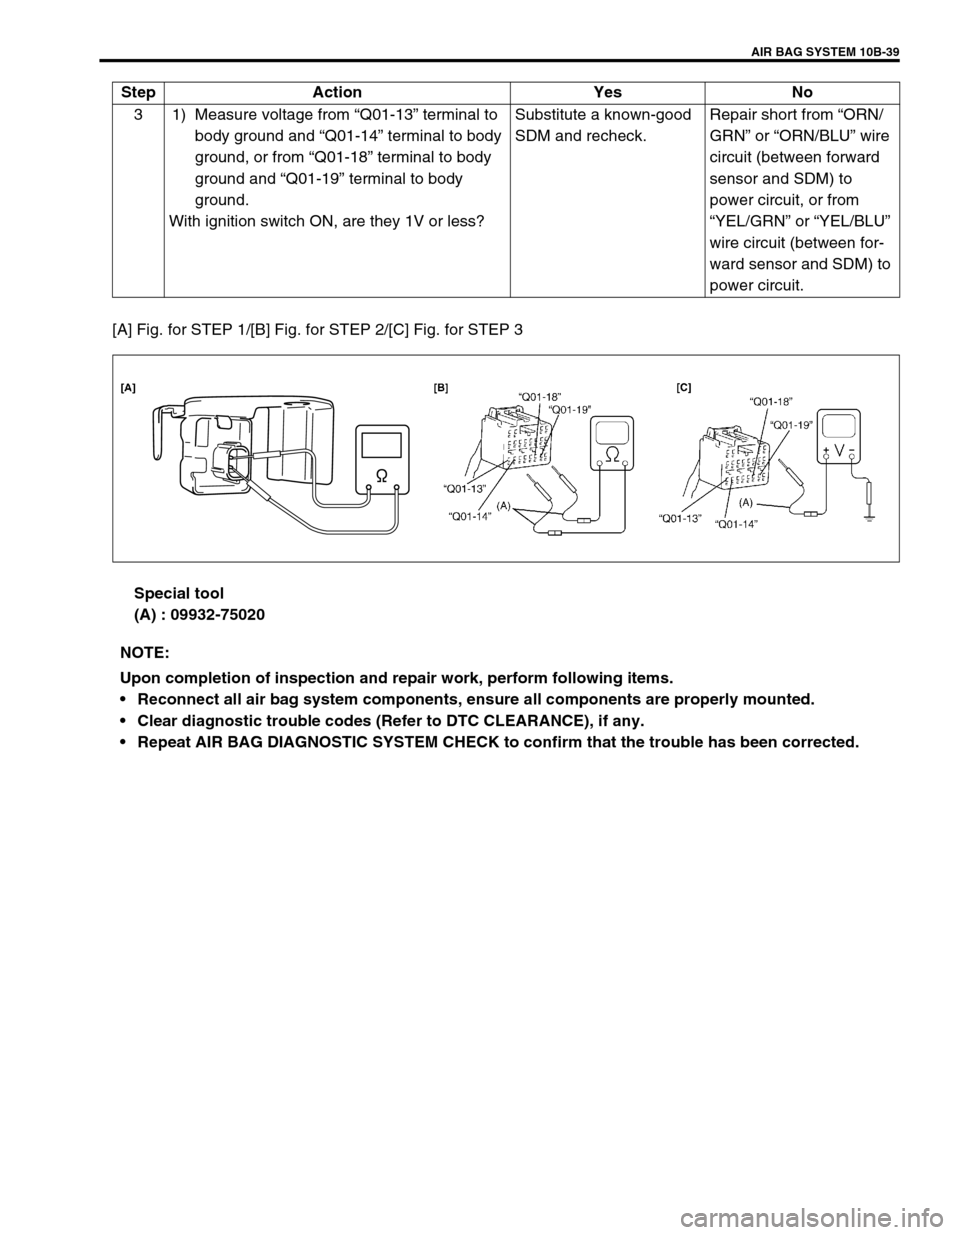 SUZUKI GRAND VITARA 2001 2.G Owners Manual AIR BAG SYSTEM 10B-39
[A] Fig. for STEP 1/[B] Fig. for STEP 2/[C] Fig. for STEP 3
Special tool
(A) : 09932-75020 3 1) Measure voltage from “Q01-13” terminal to 
body ground and “Q01-14” termin